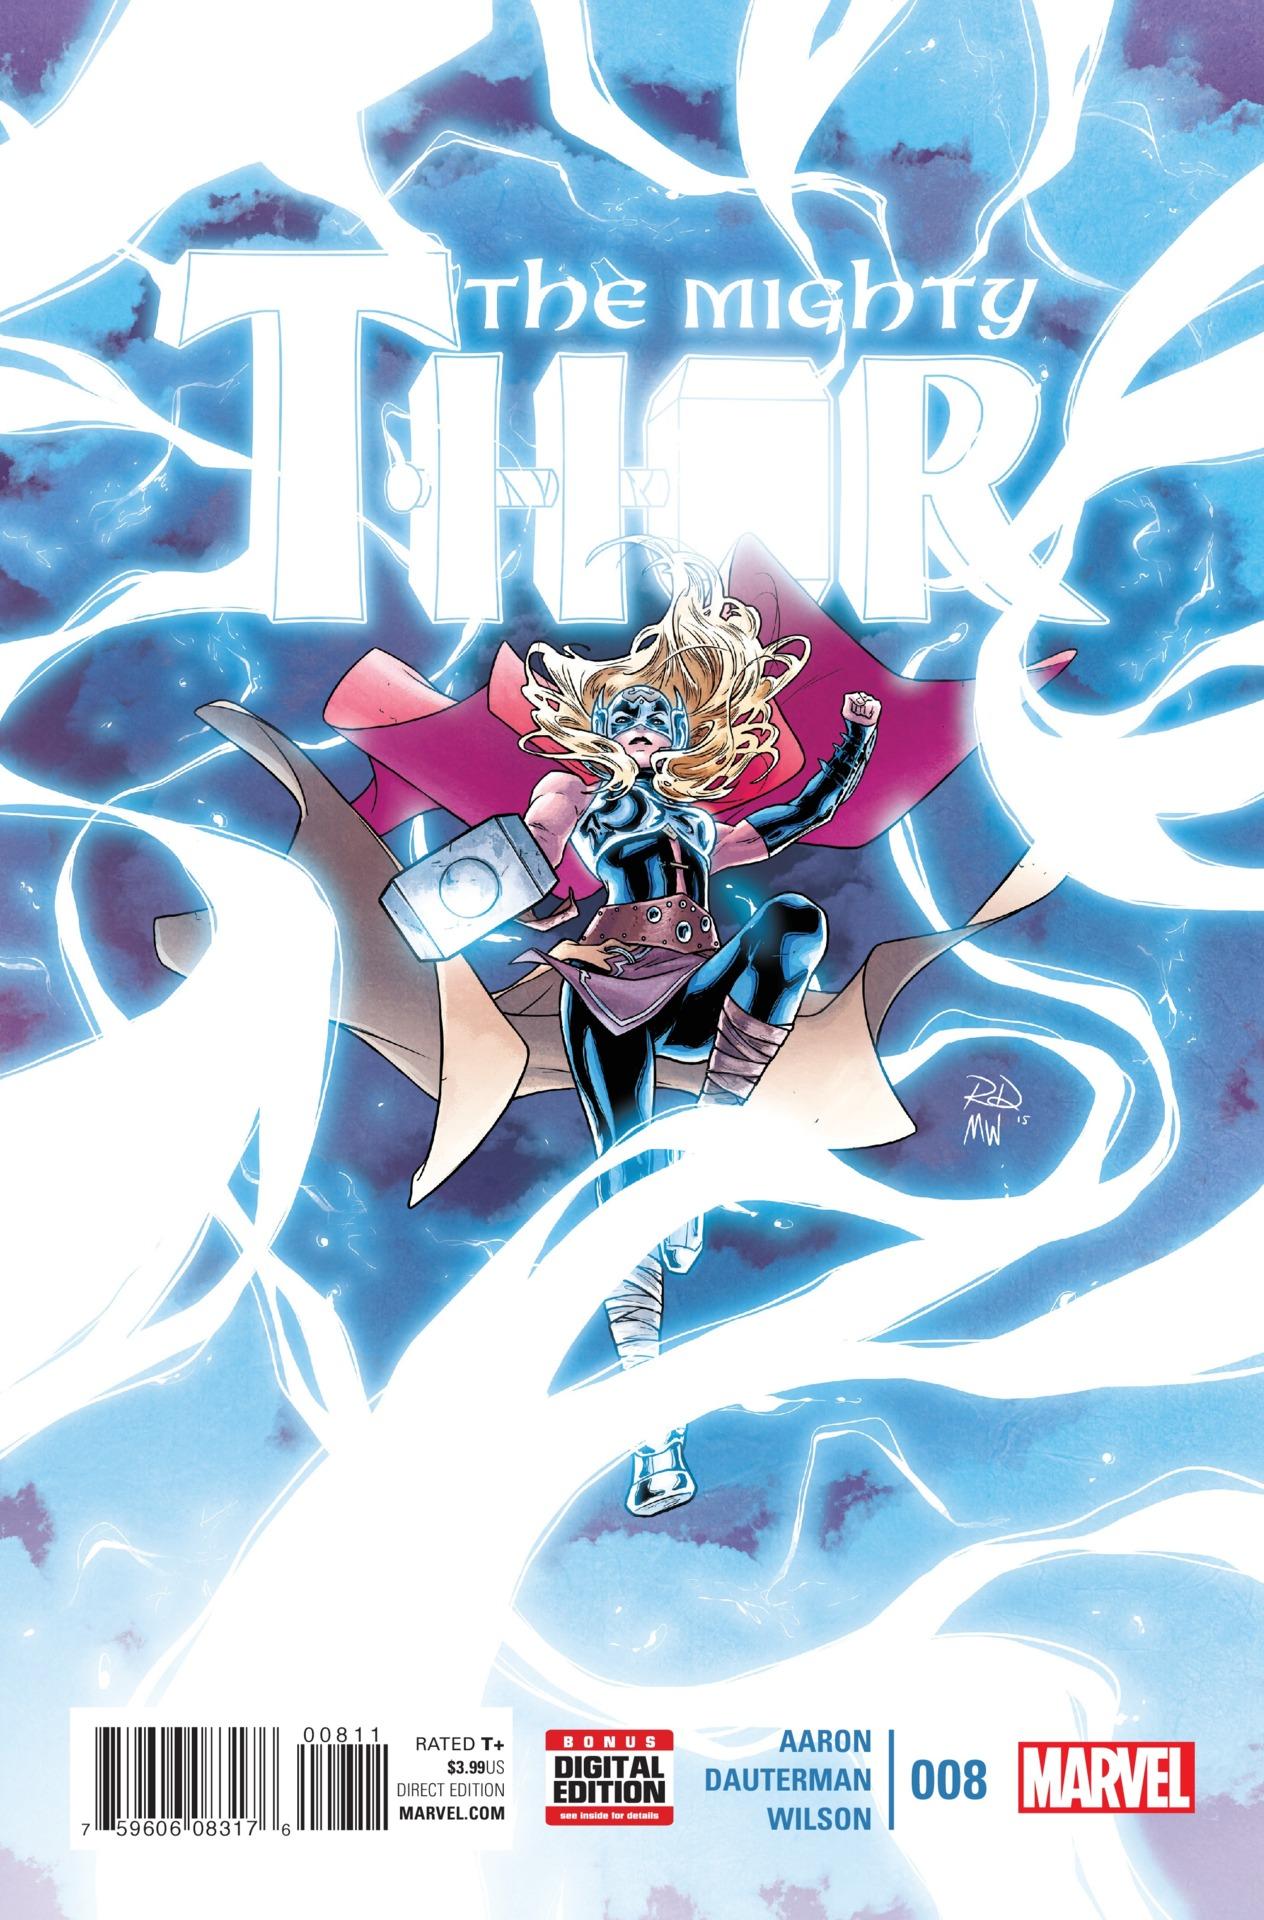 The Mighty Thor Vol. 2 #8